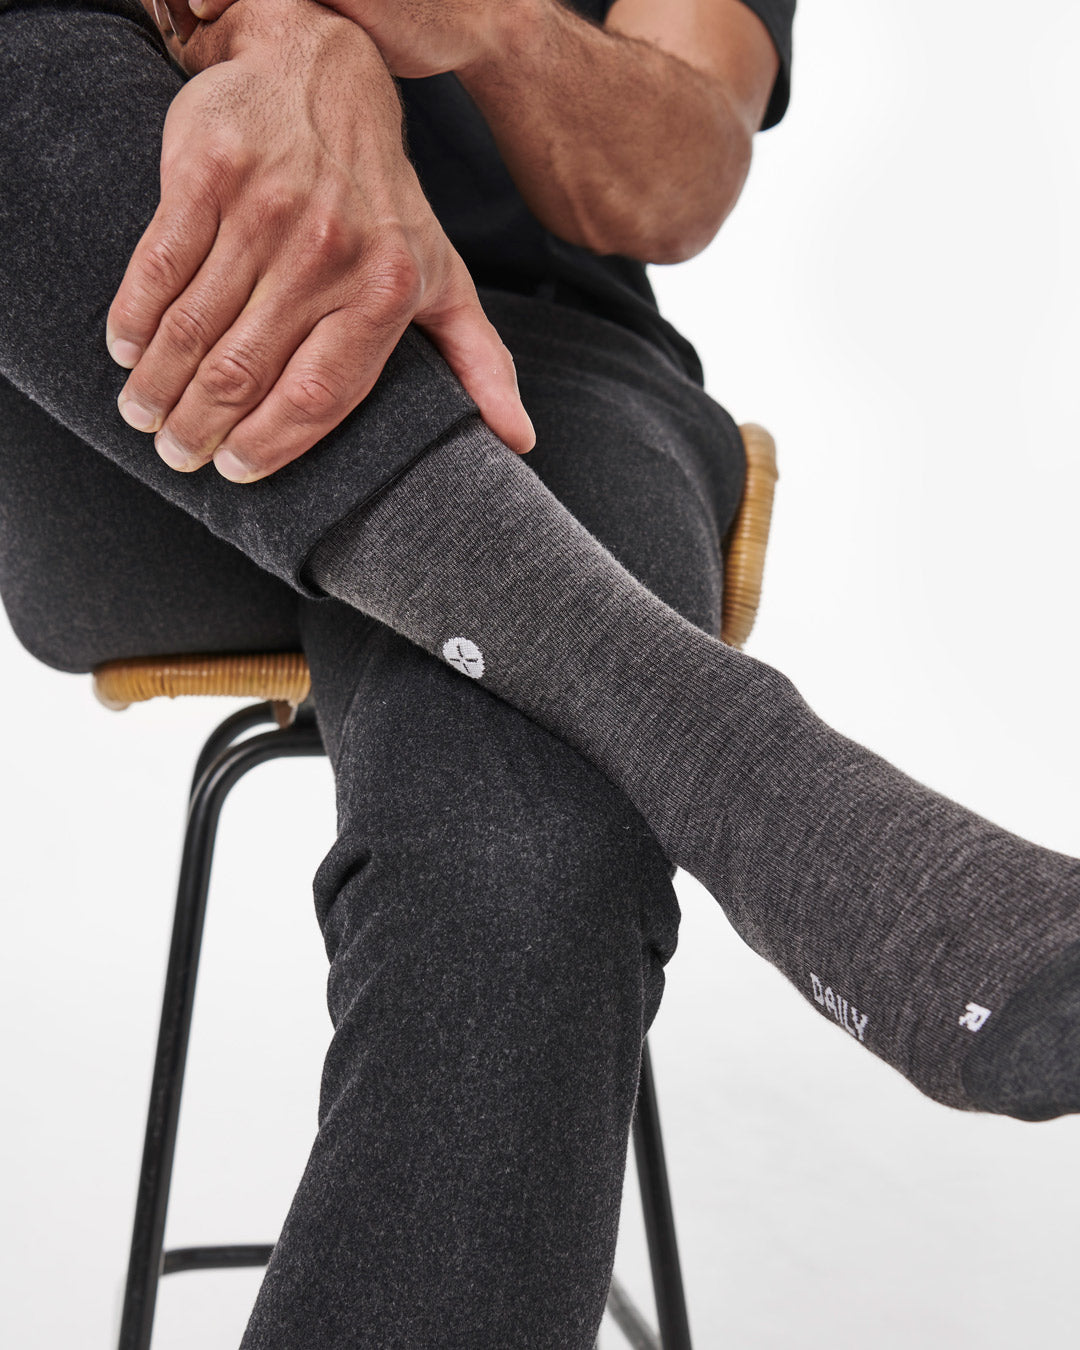 What are diabetic socks? Advantages, costs and more